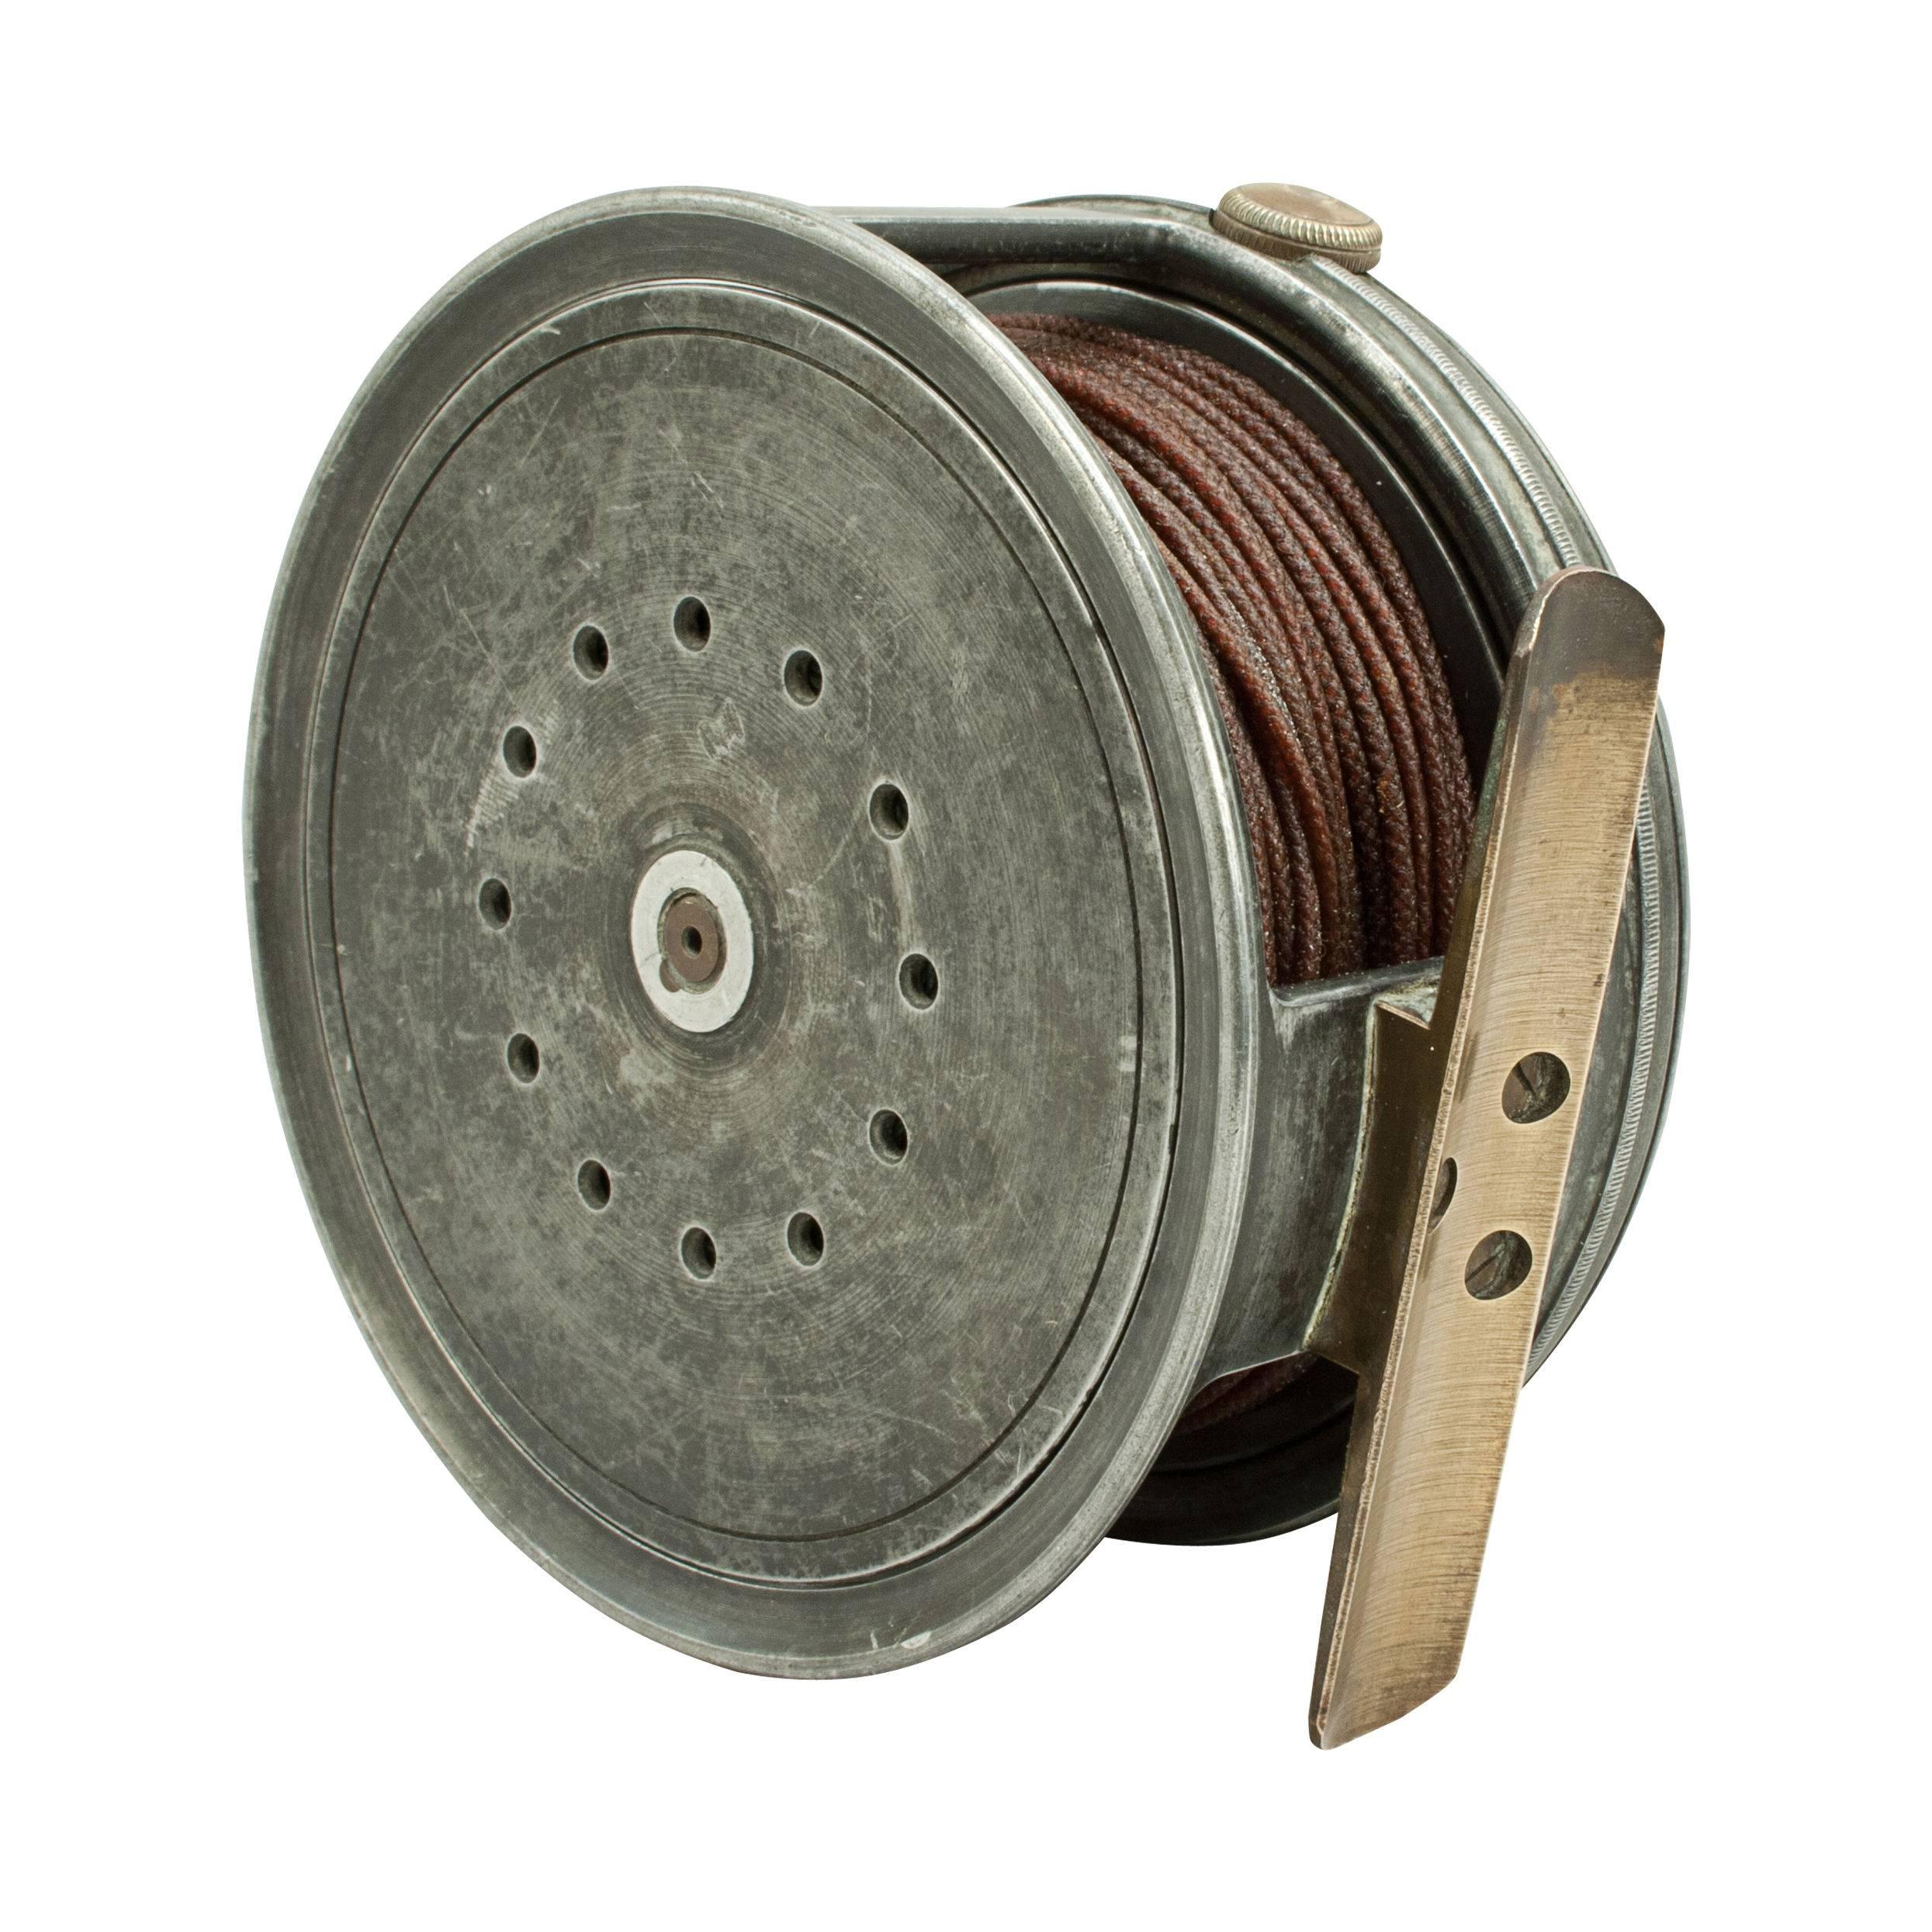 Salmon fly fishing reel by Foster of Ashbourne. This is a 'Hardy Perfect' type salmon reel made from aluminium with bakelite handle, brass foot and tension screw. The reel comes with silk line.